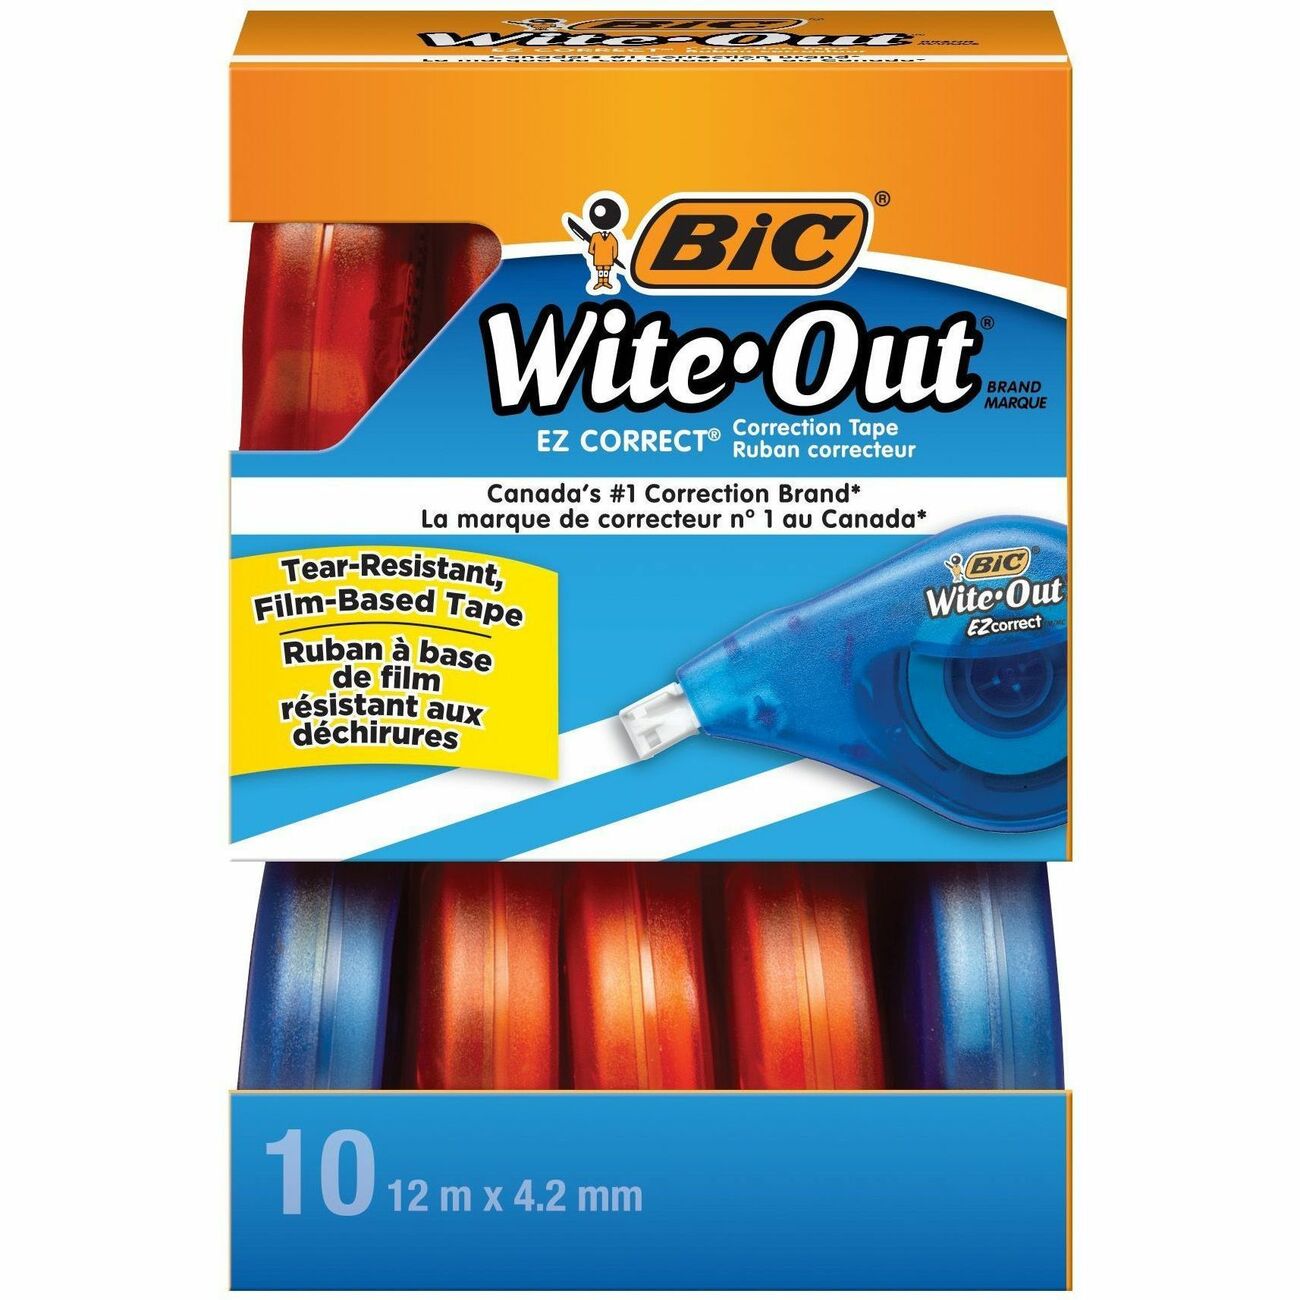 Wite-Out Wite-Out EZ Correct Correction TapeBICWOTAP10WHI